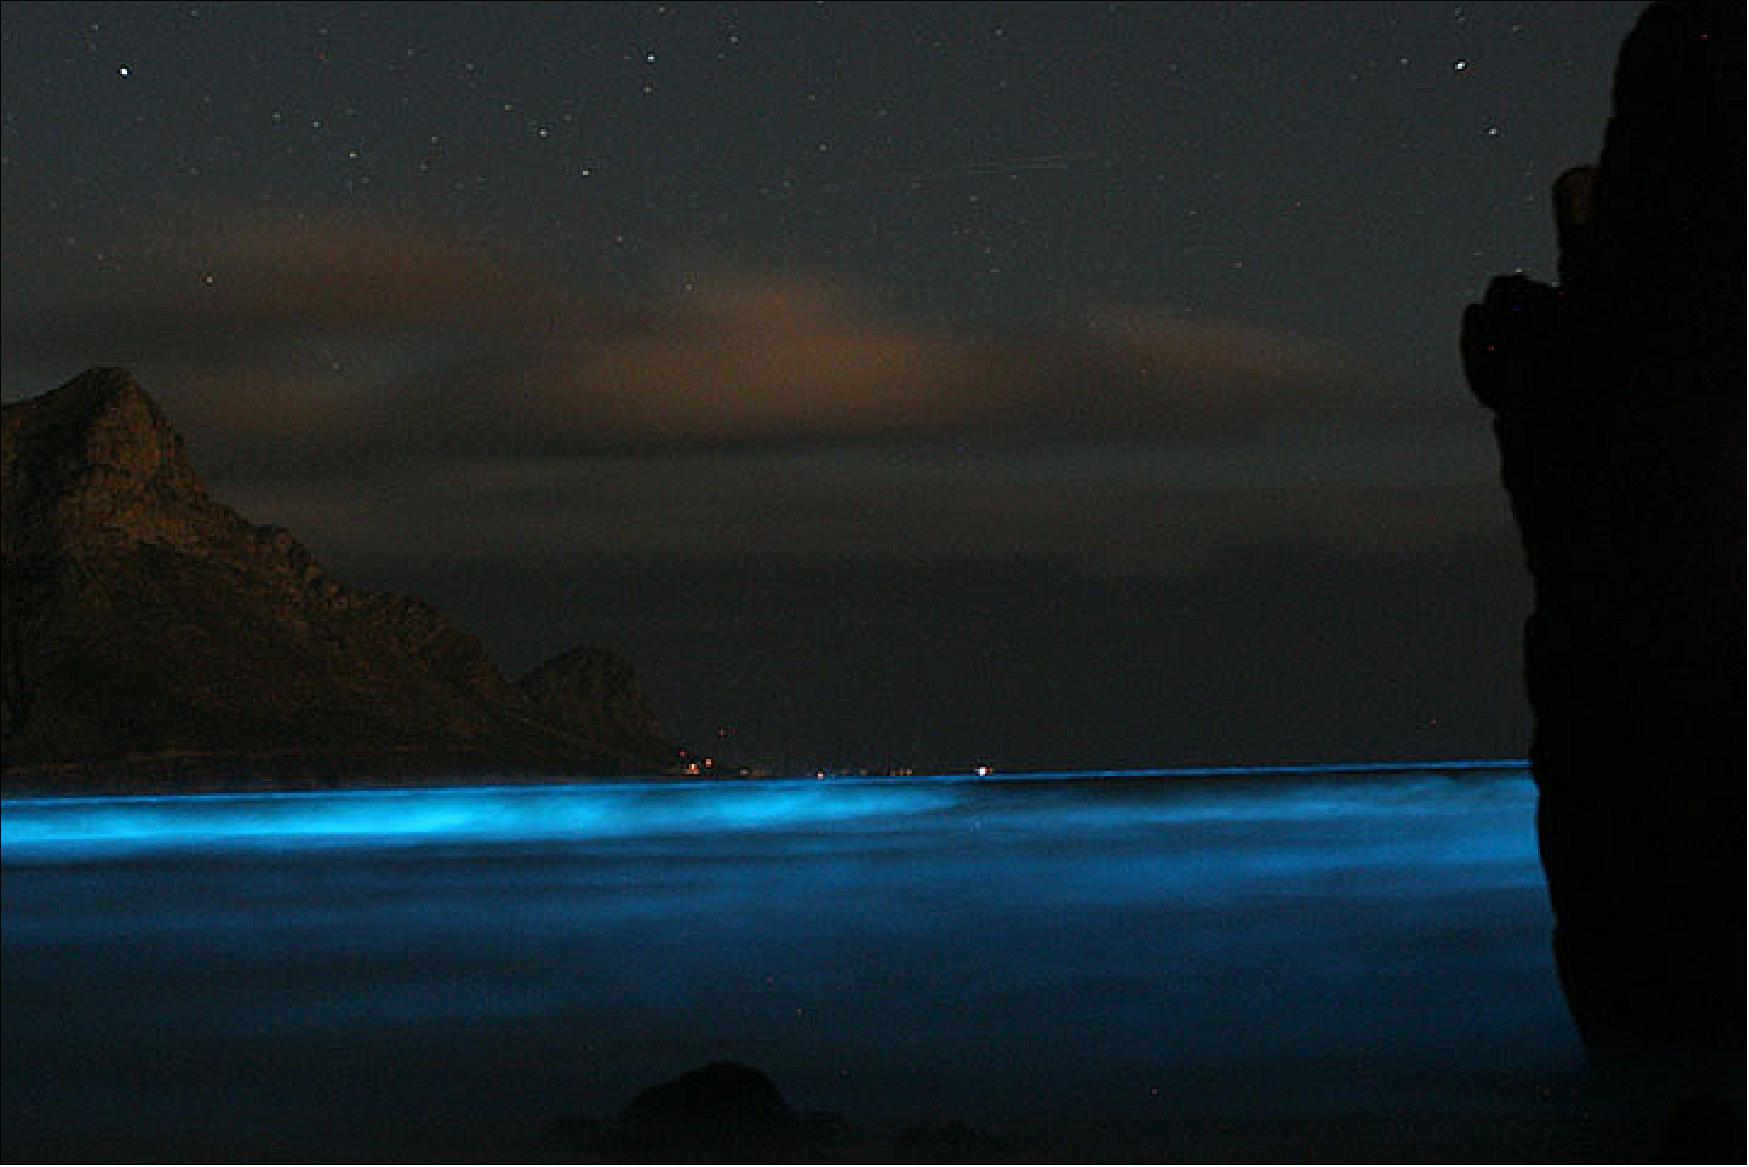 Figure 10: . The long-exposure photograph of 26 February 2007 shows the luminous glow the phytoplankton can produce (image credit: NASA Earth Observatory, photograph by Bruce Anderson (University of Stellenbosch). Story by Adam Voiland)